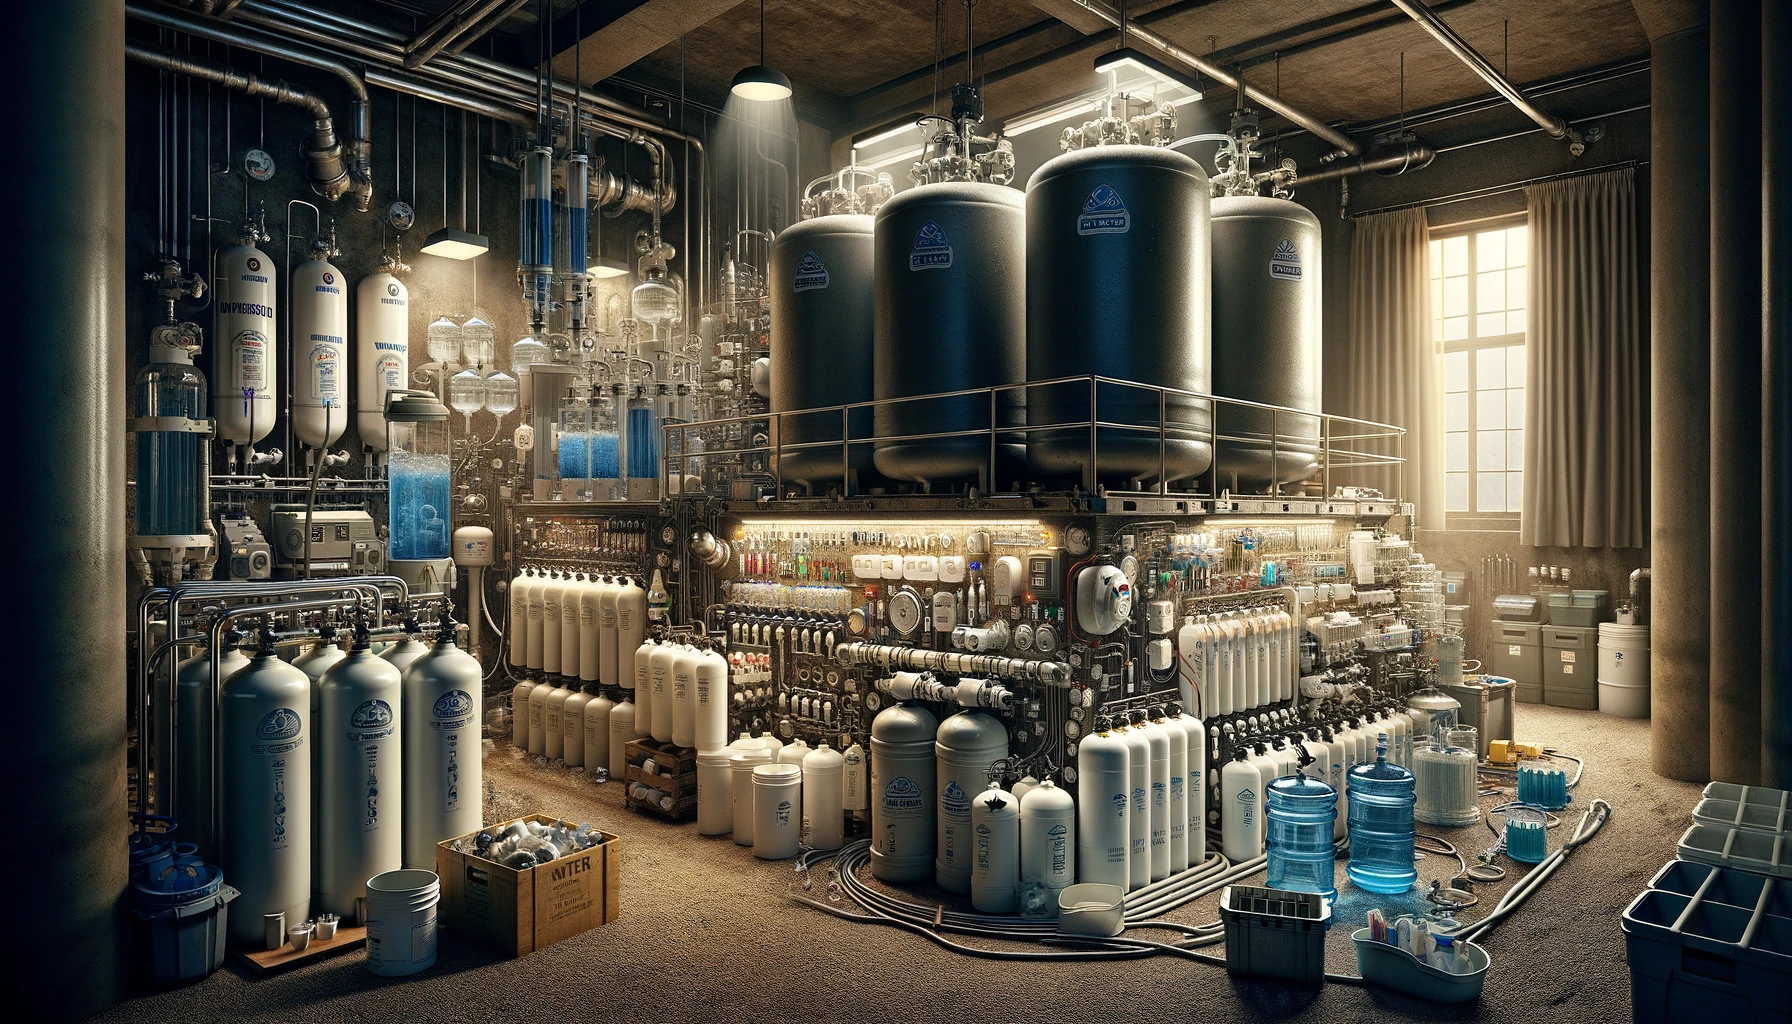 Detailed scene showcasing a comprehensive water storage and purification setup with large tanks, filtration systems, and various purification methods in a well-organized space, emphasizing the critical role of reliable, clean water supply in survival and preparedness